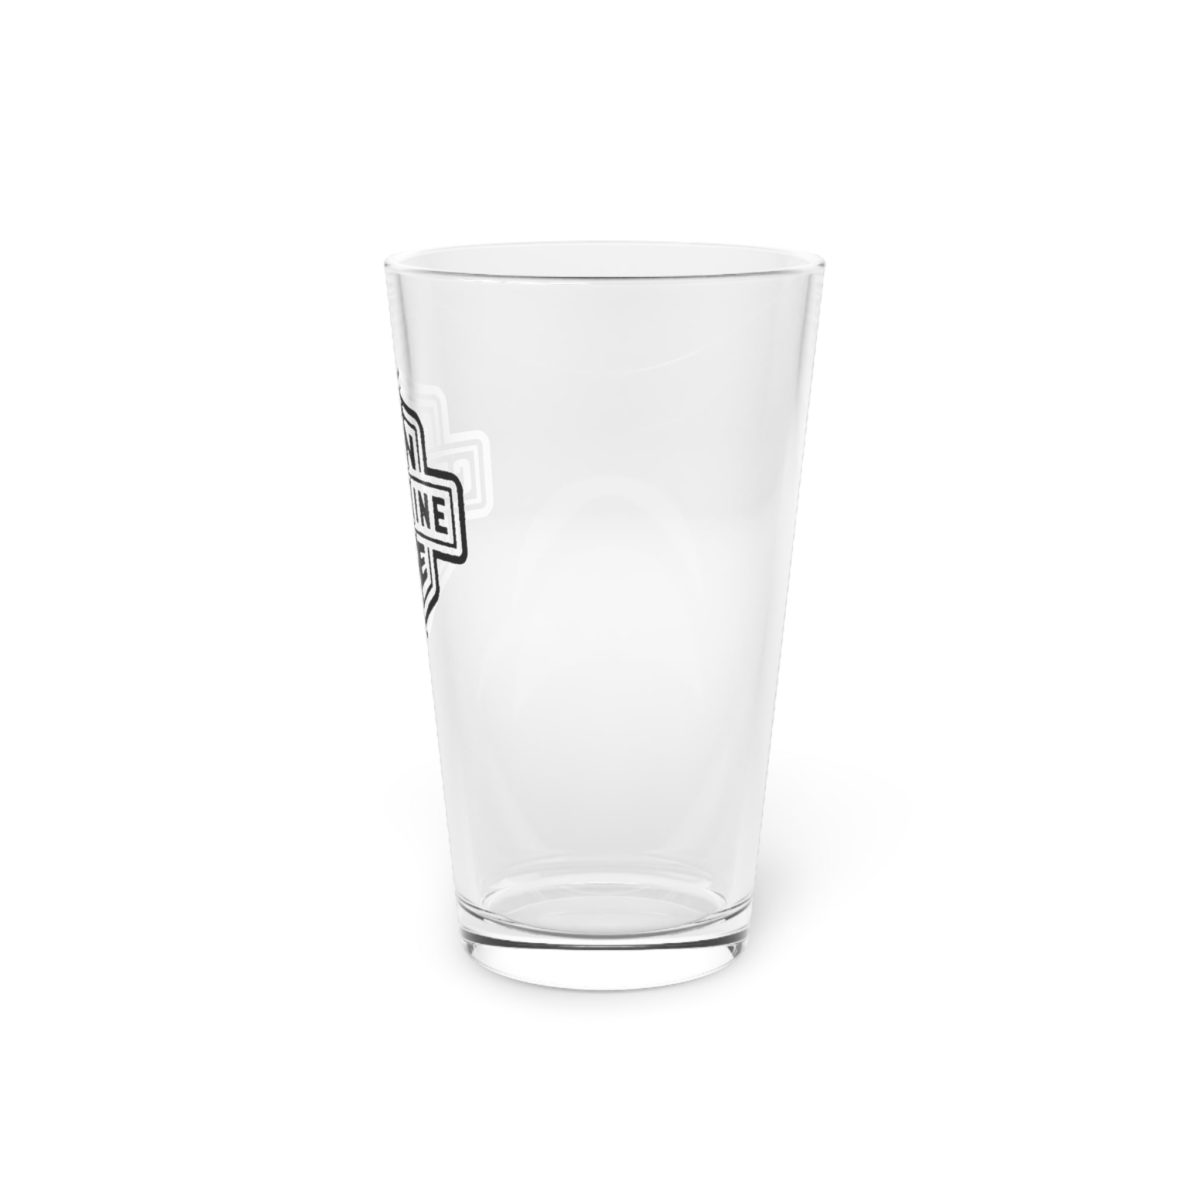 https://bombswag.com/wp-content/uploads/2023/08/crestline-beer-glass-with-mountain-life-shield-side-1-scaled.jpg